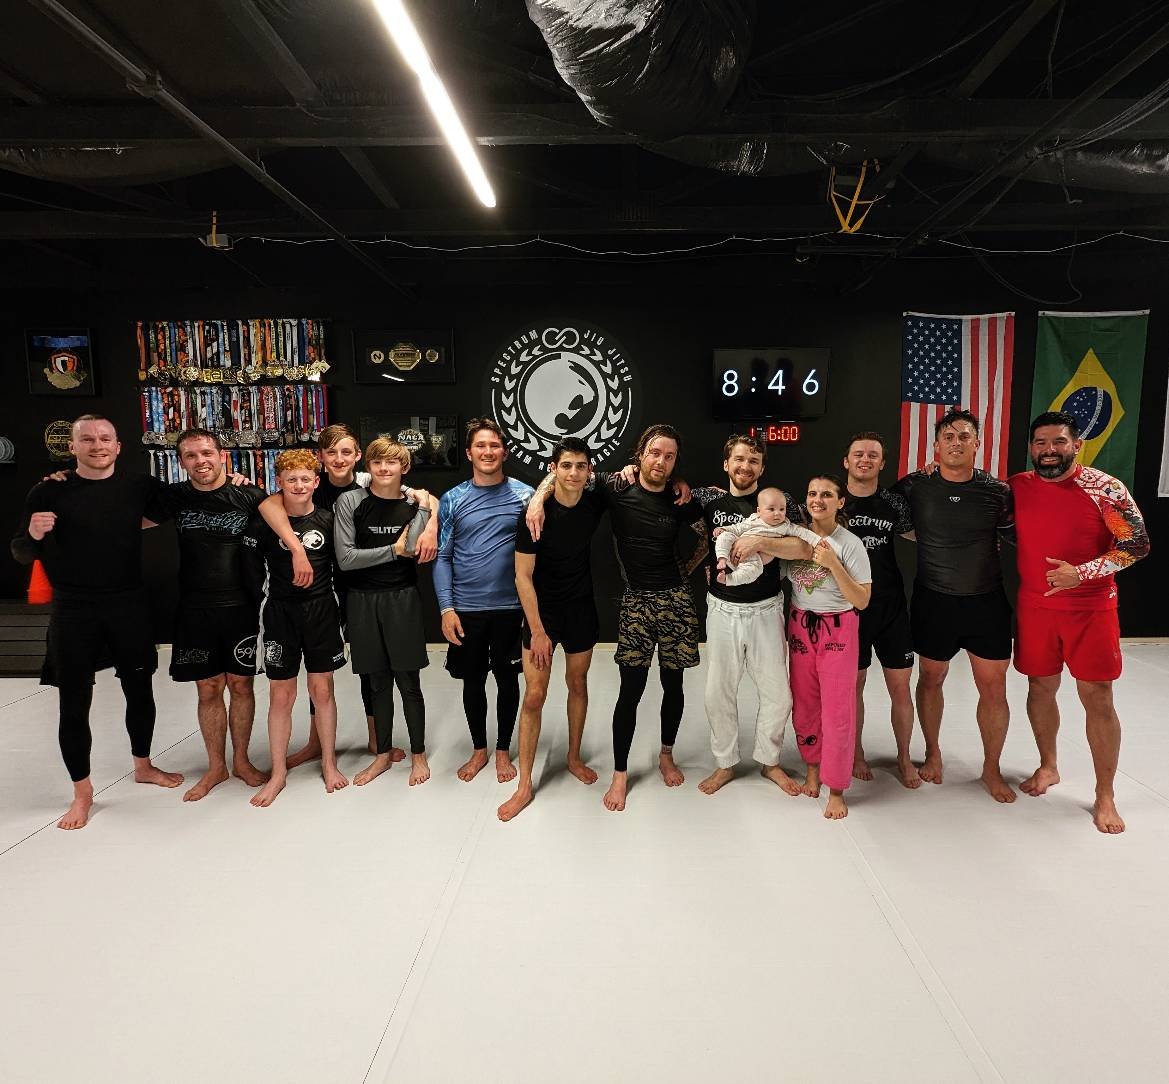 NOGI // 5.14.24

Thank you to our friend Kevin for dropping in to train with us!